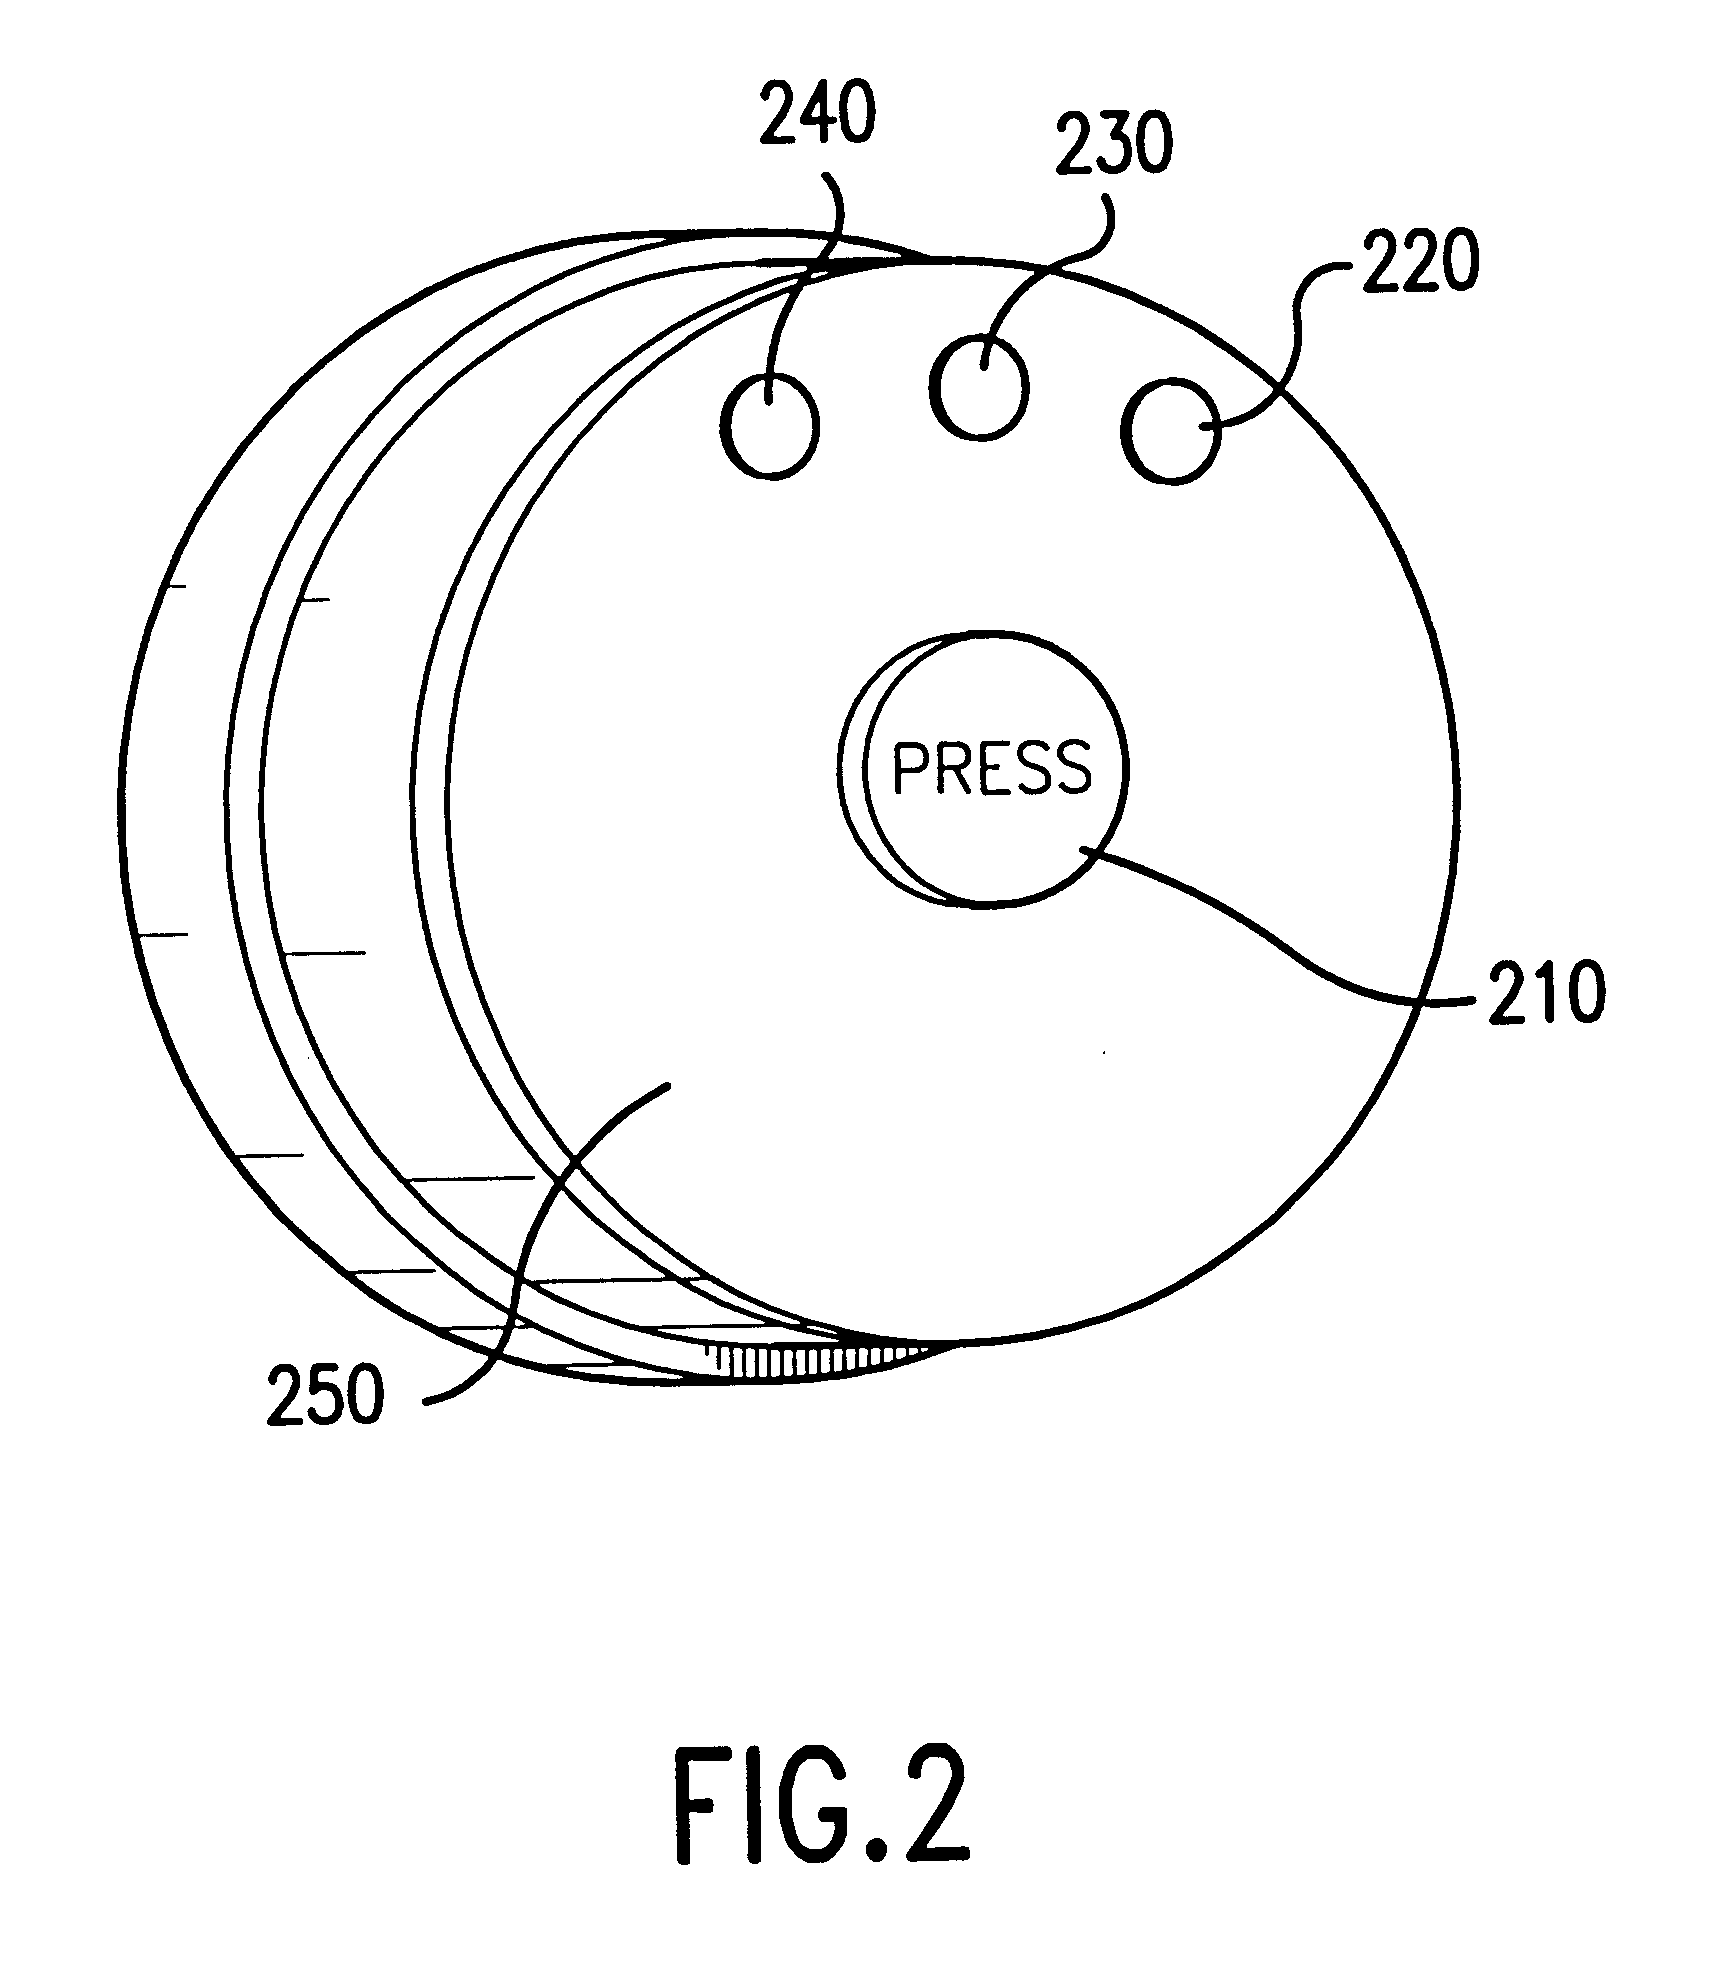 Systems and methods for reducing post-surgical complications